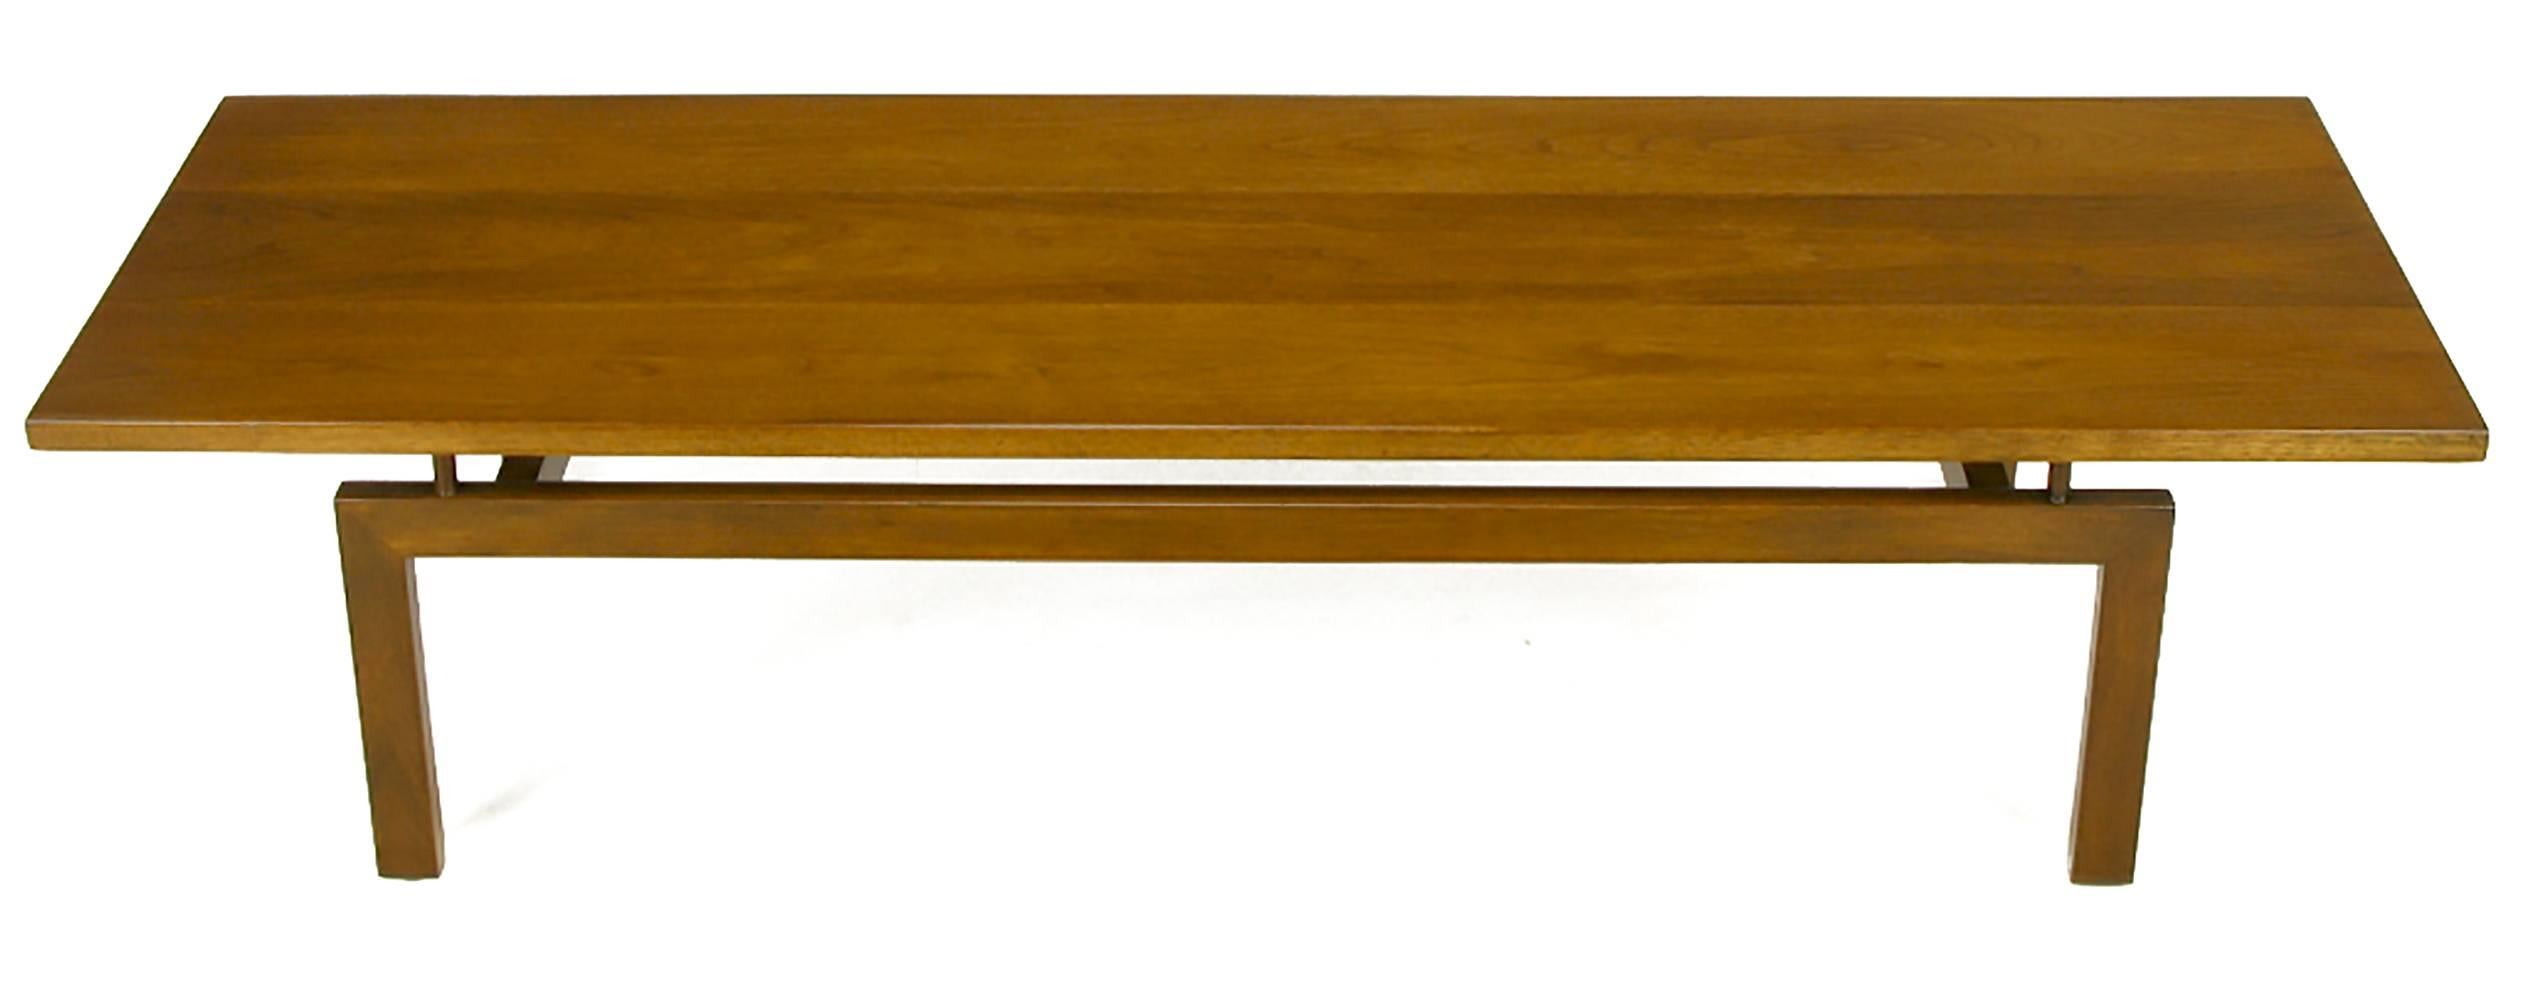 Floating top walnut coffee table after designs by Paul Laszlo for Brown Saltman. Solid three piece top is surmounted atop four wood cylinders. U-shaped walnut legs with a pair of inconspicuous recessed stretchers.